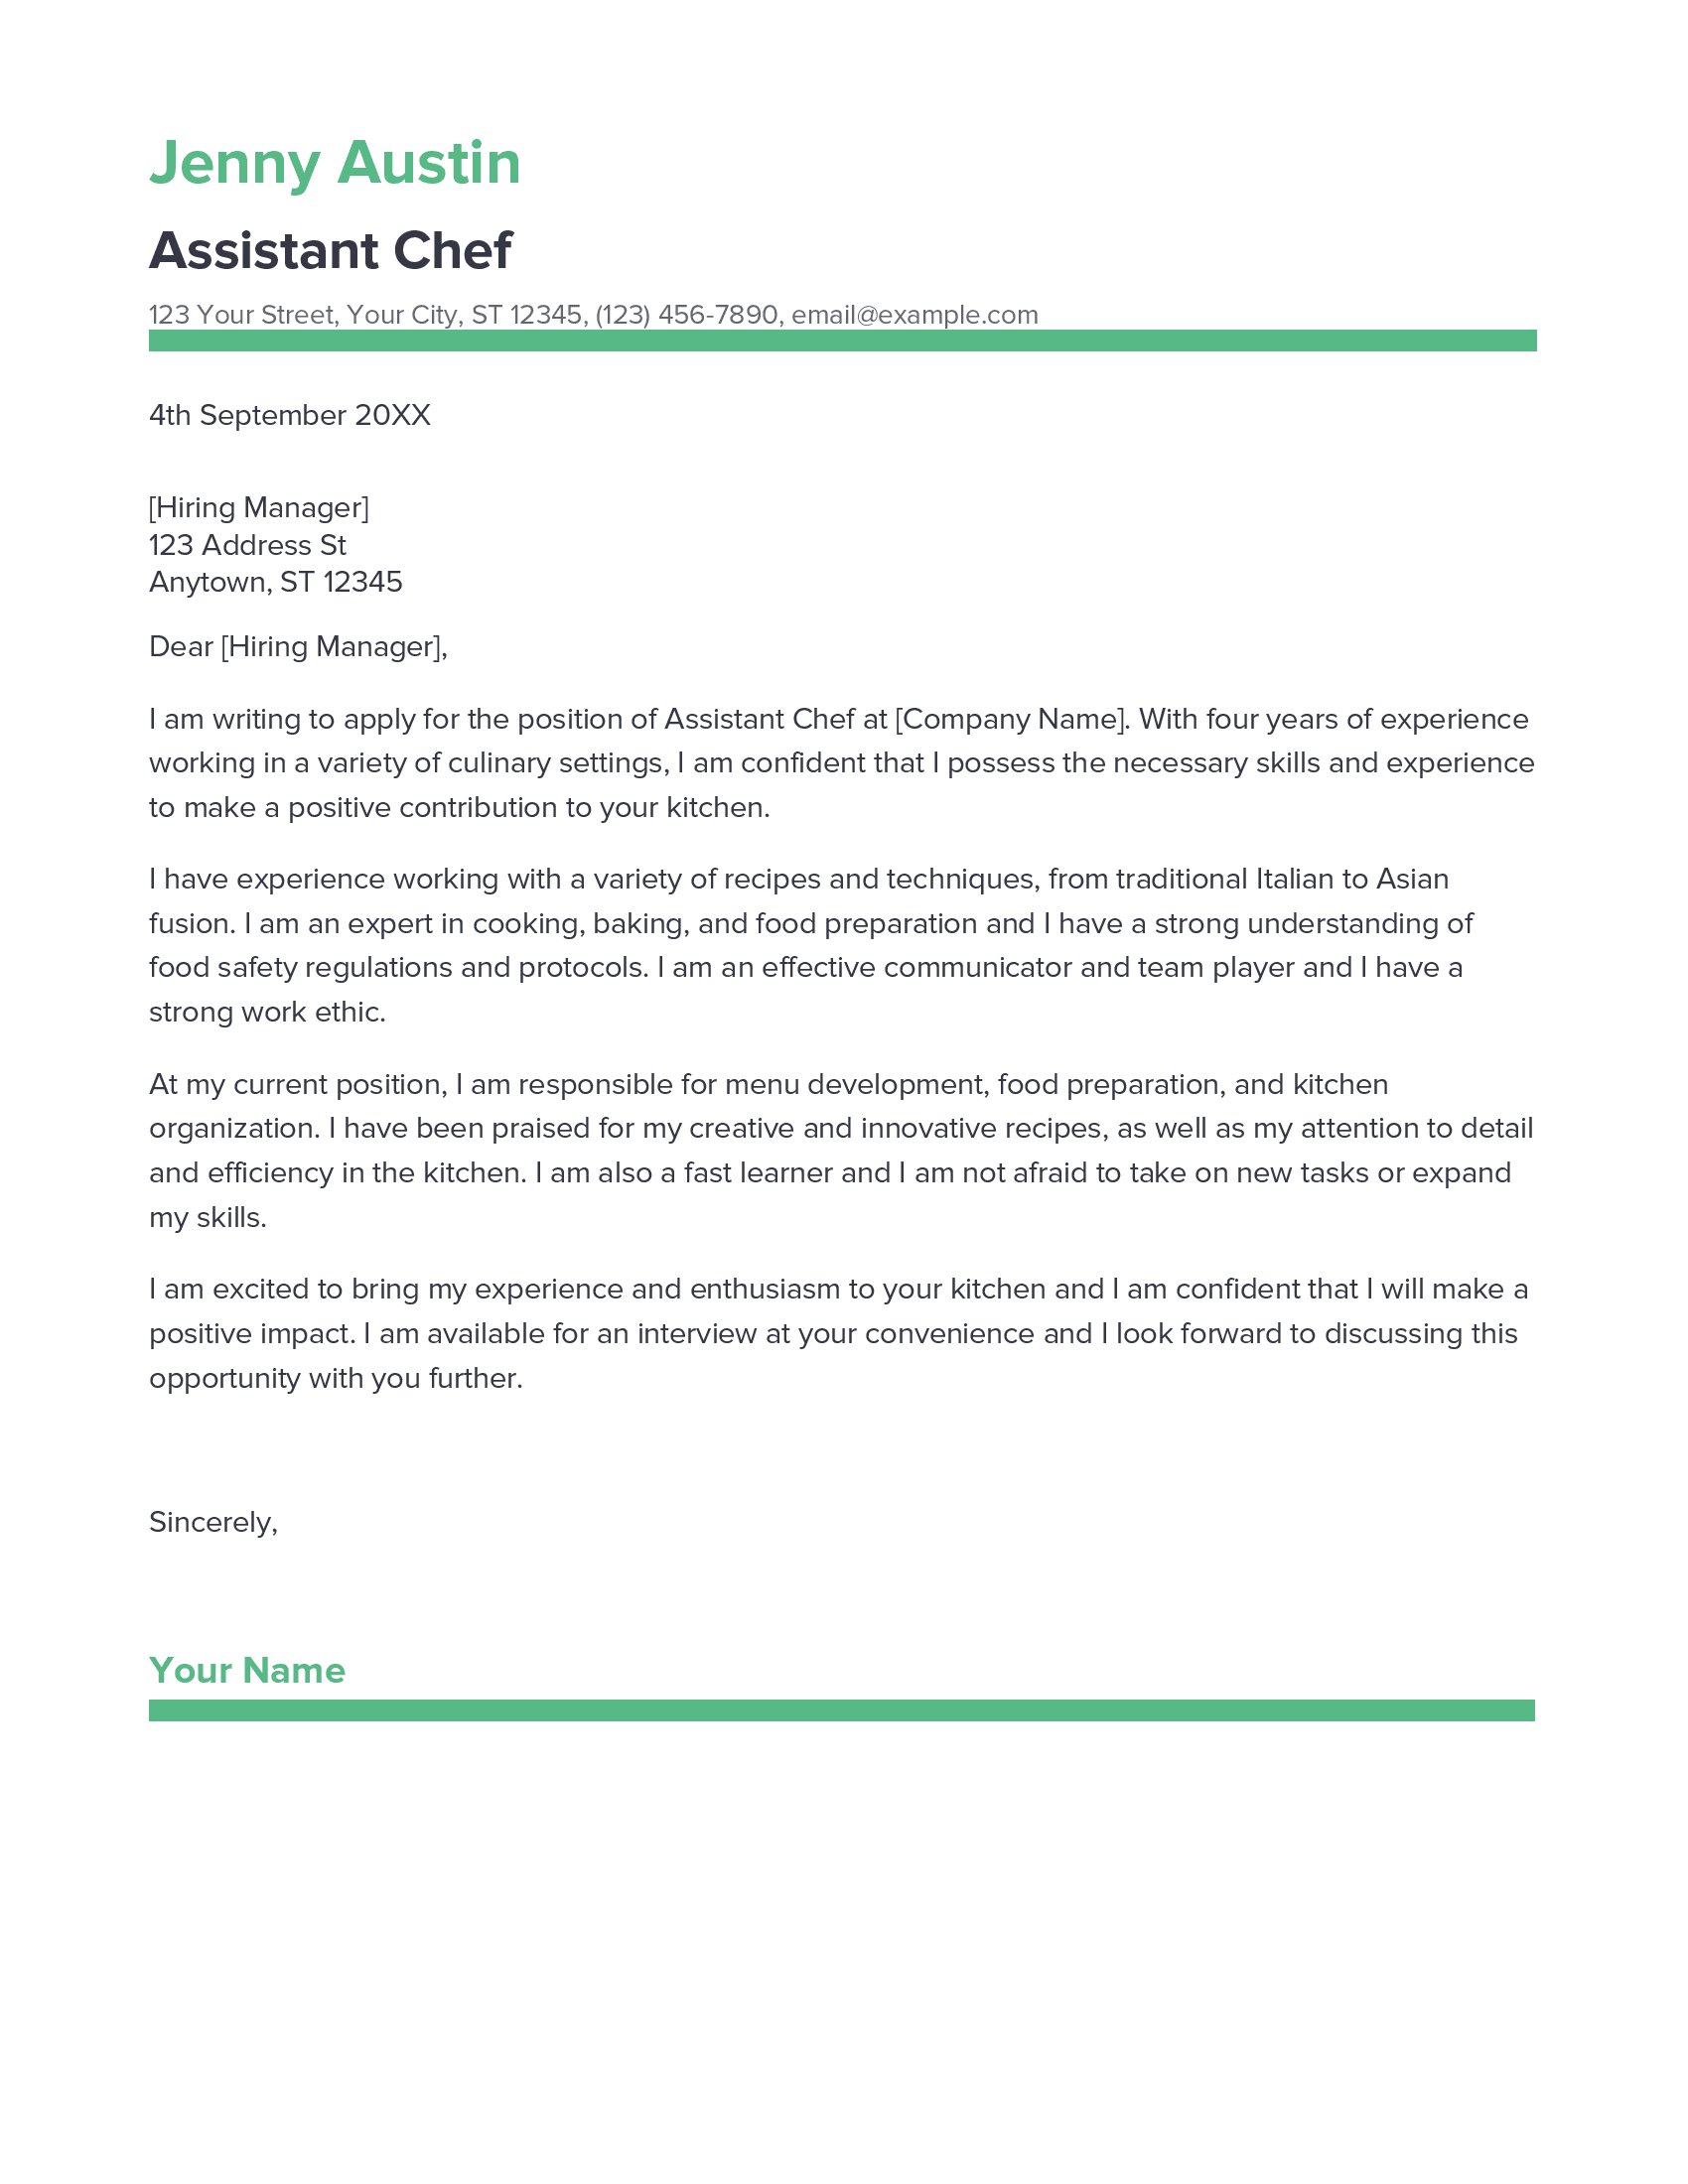 cover letter for assistant chef